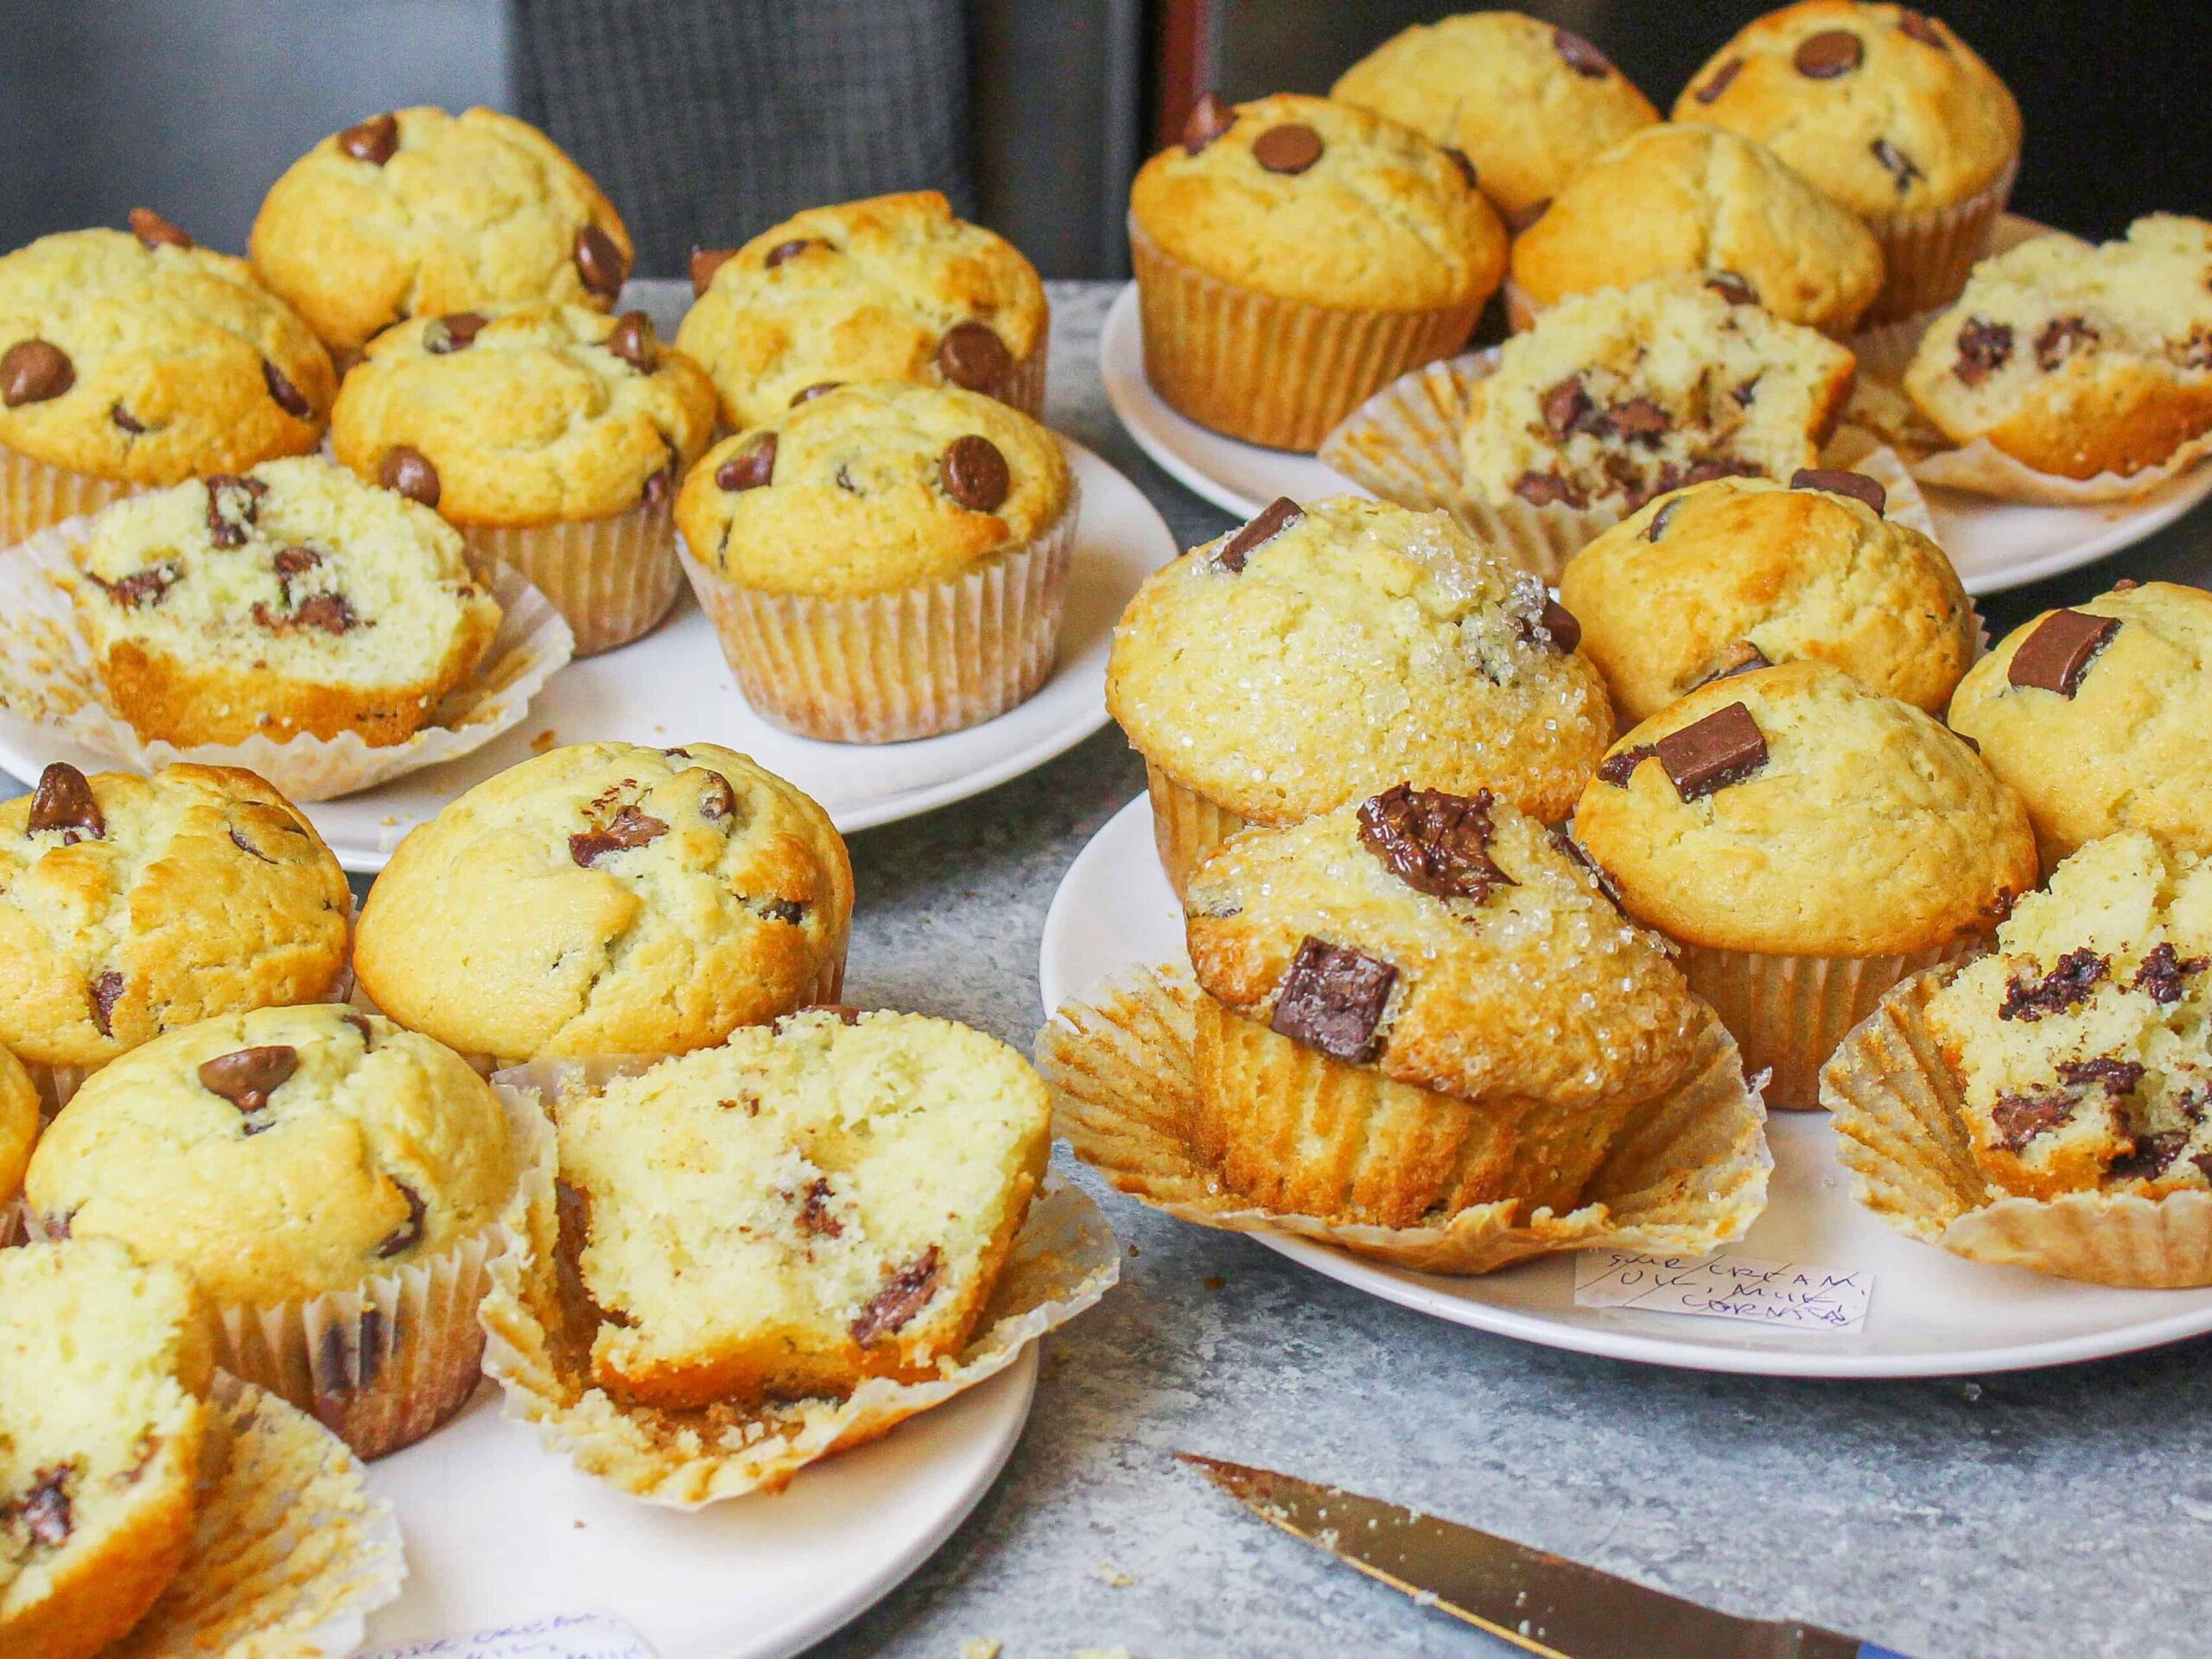 photo of several batches of chocolate chip muffins made by chelsweets during recipe testing